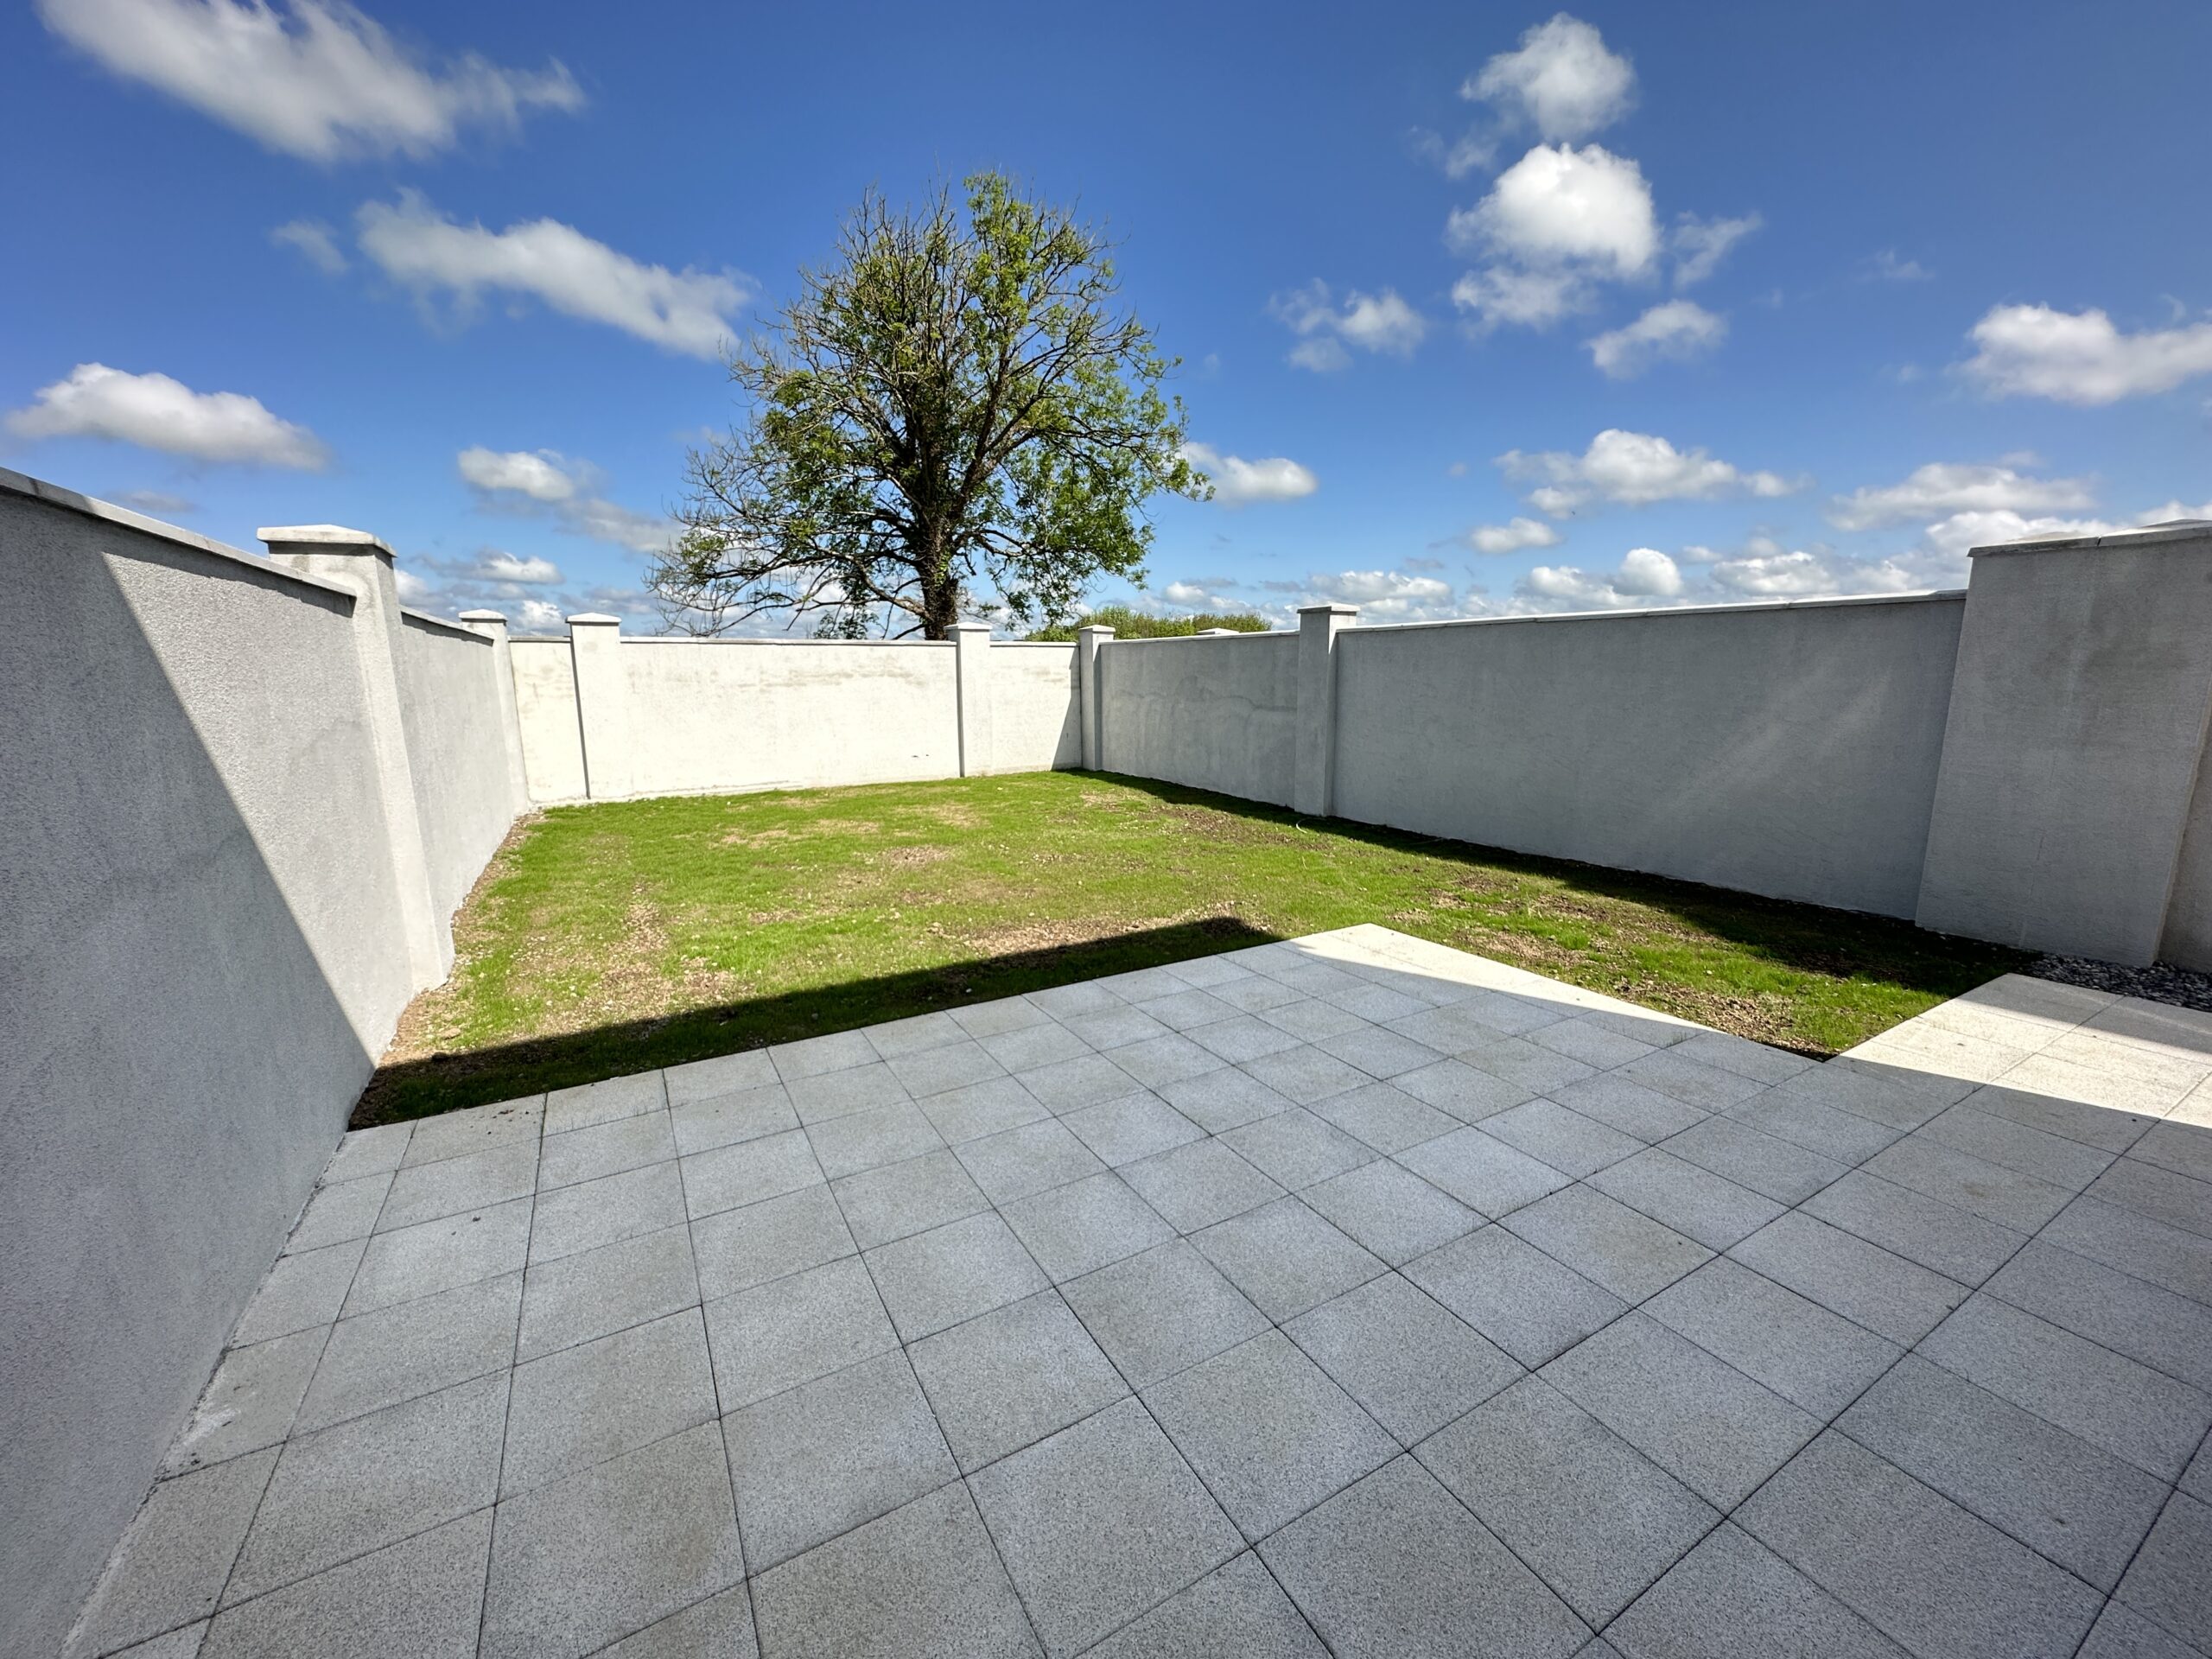 A minimalist outdoor space with gray paved tiles leading to a small grassy area, encircled by high white walls under a blue sky with fluffy clouds, perfect for a home page background.